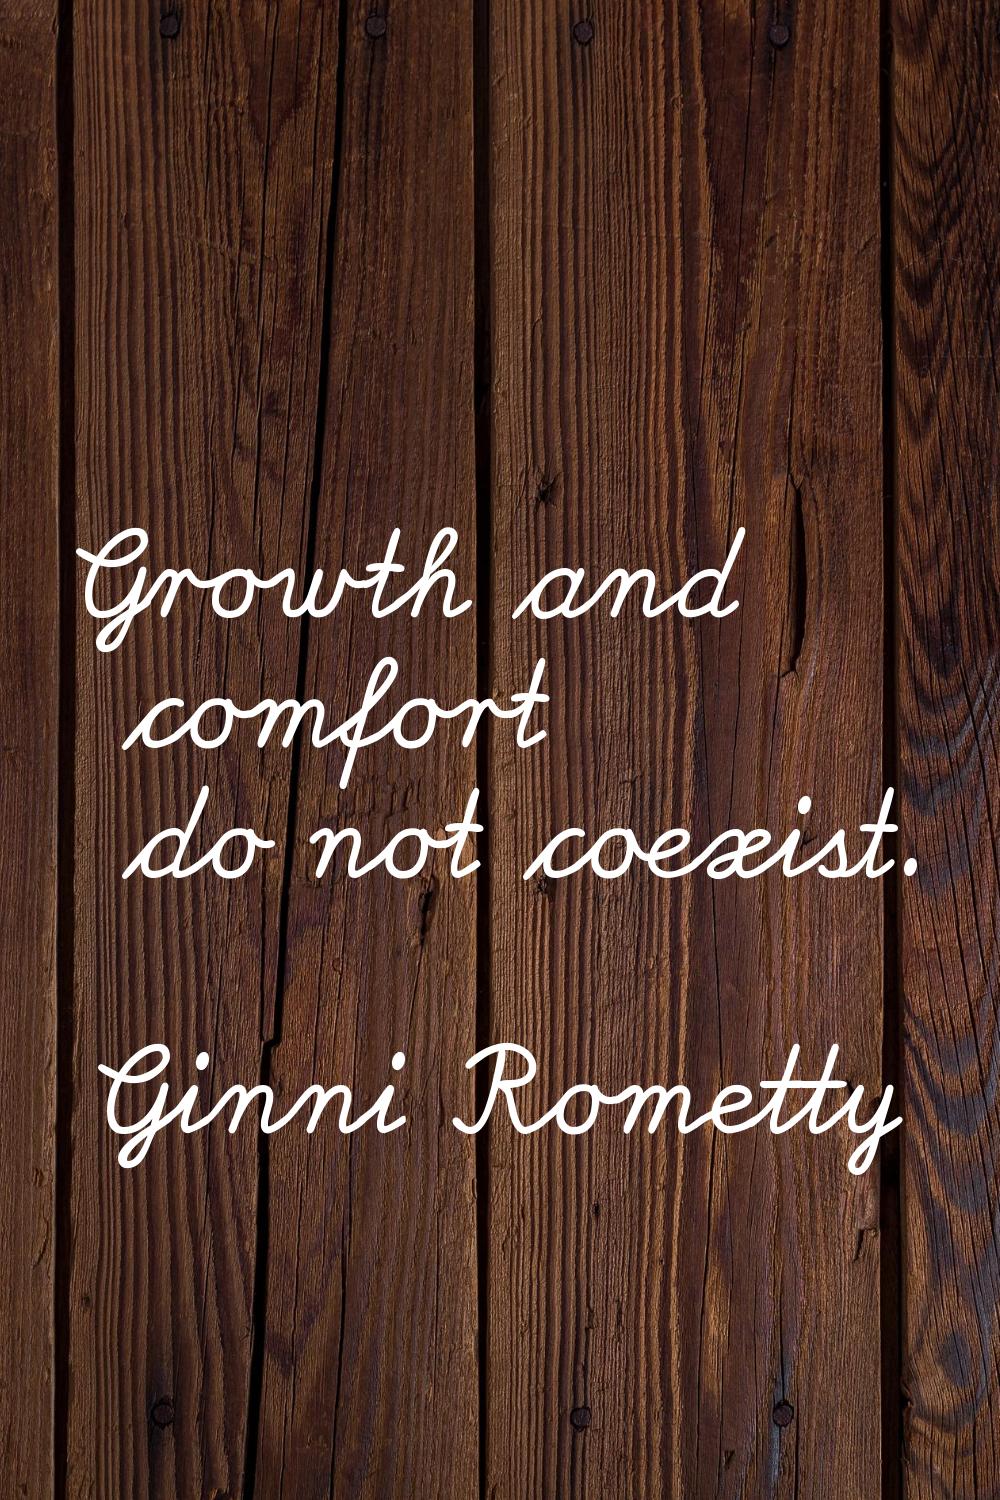 Growth and comfort do not coexist.